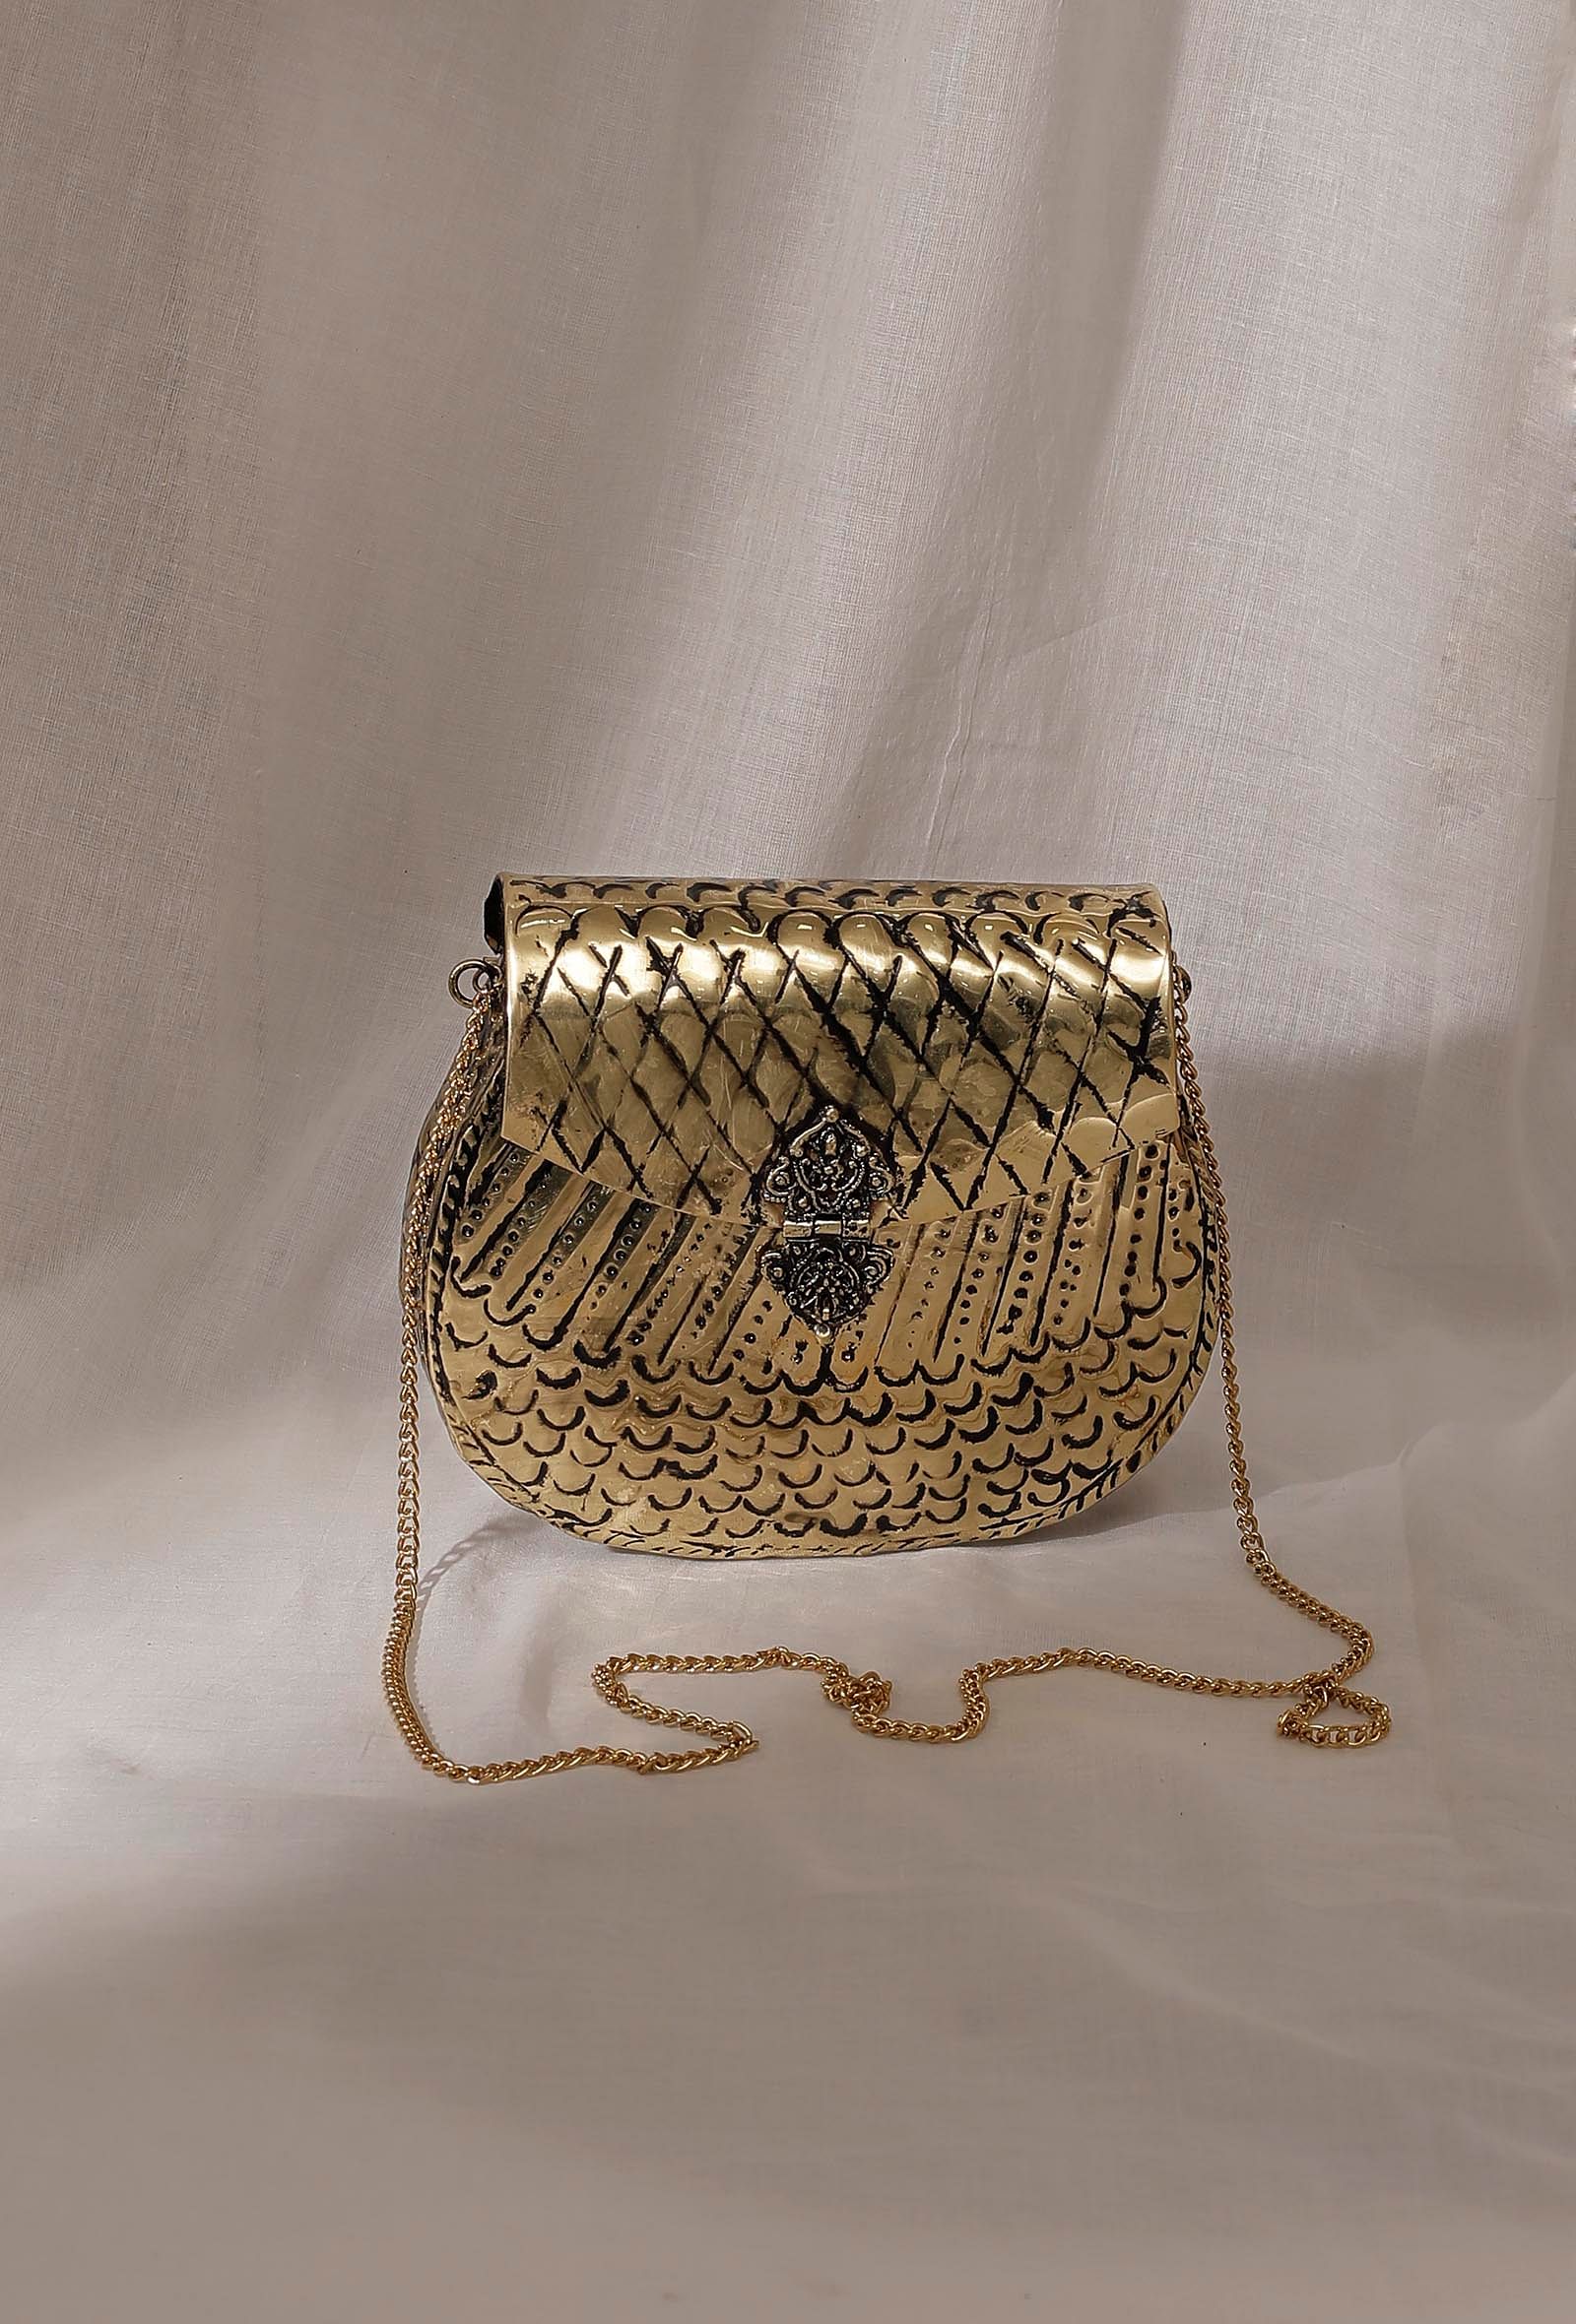 Buy Handmade Metal Clutch Bag Silver Brass Metal Bag Best Gift for Her  Minimalist Bridal Clutch Party Bag With Handle Evening Purse Online in  India - Etsy